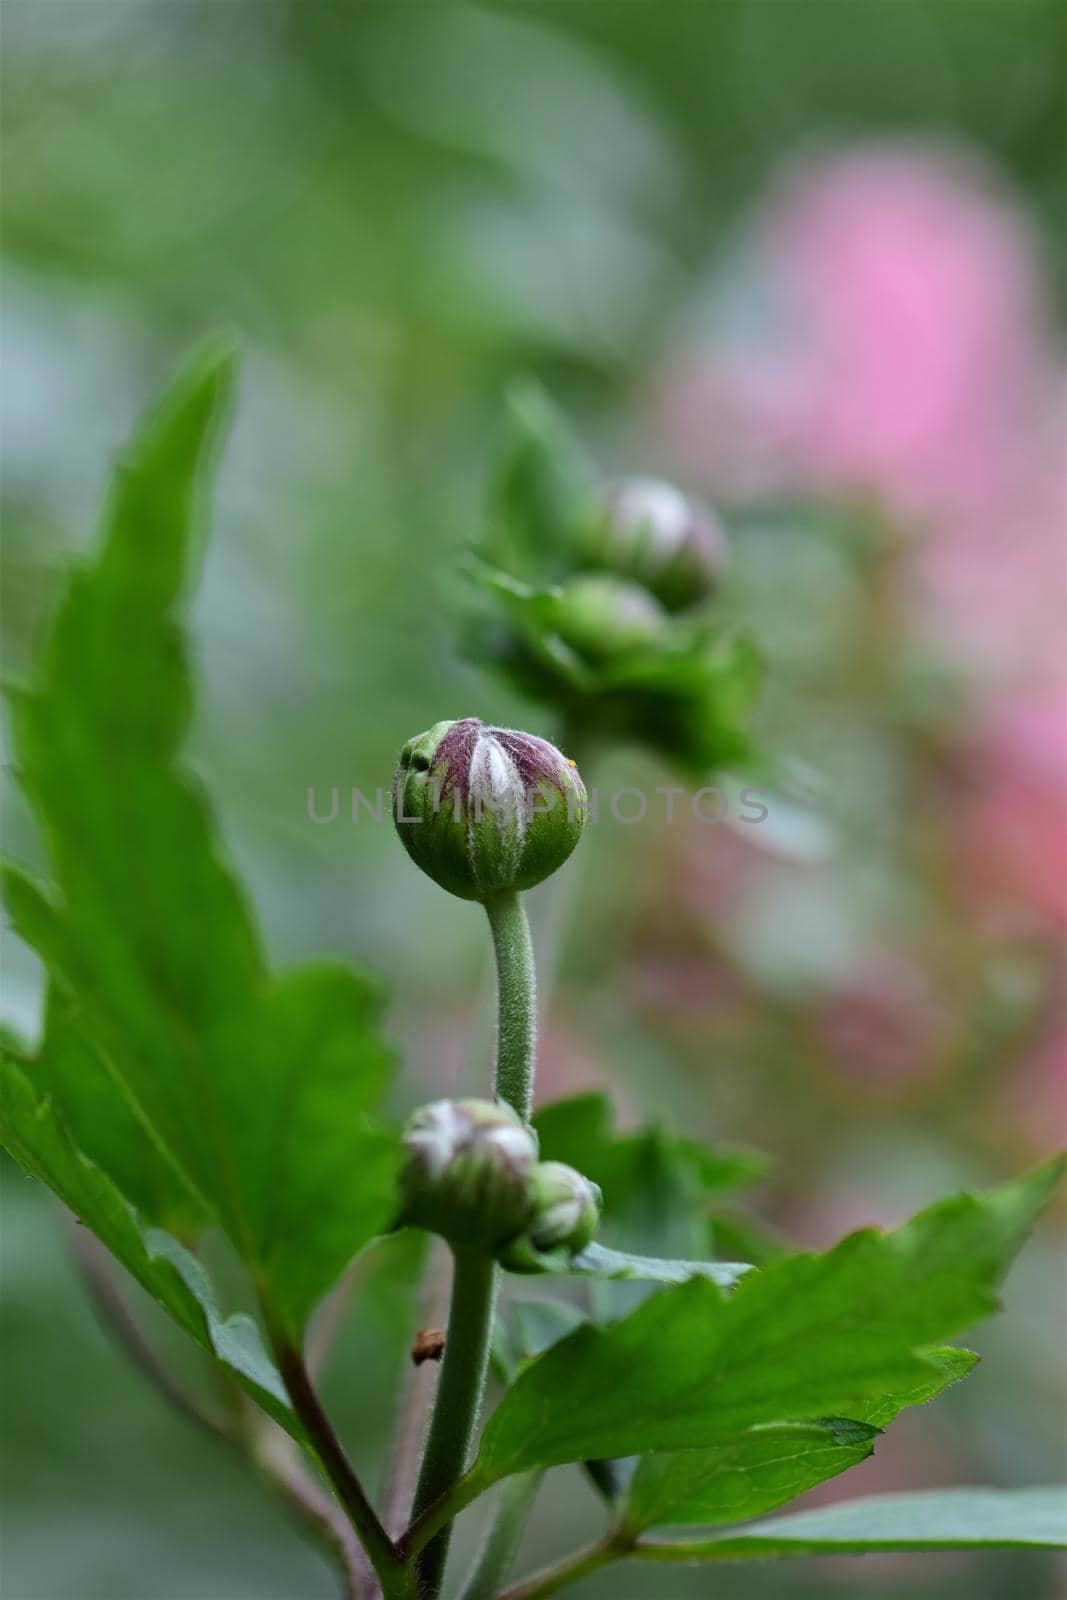 Autumn anemone buds as a close up by Luise123